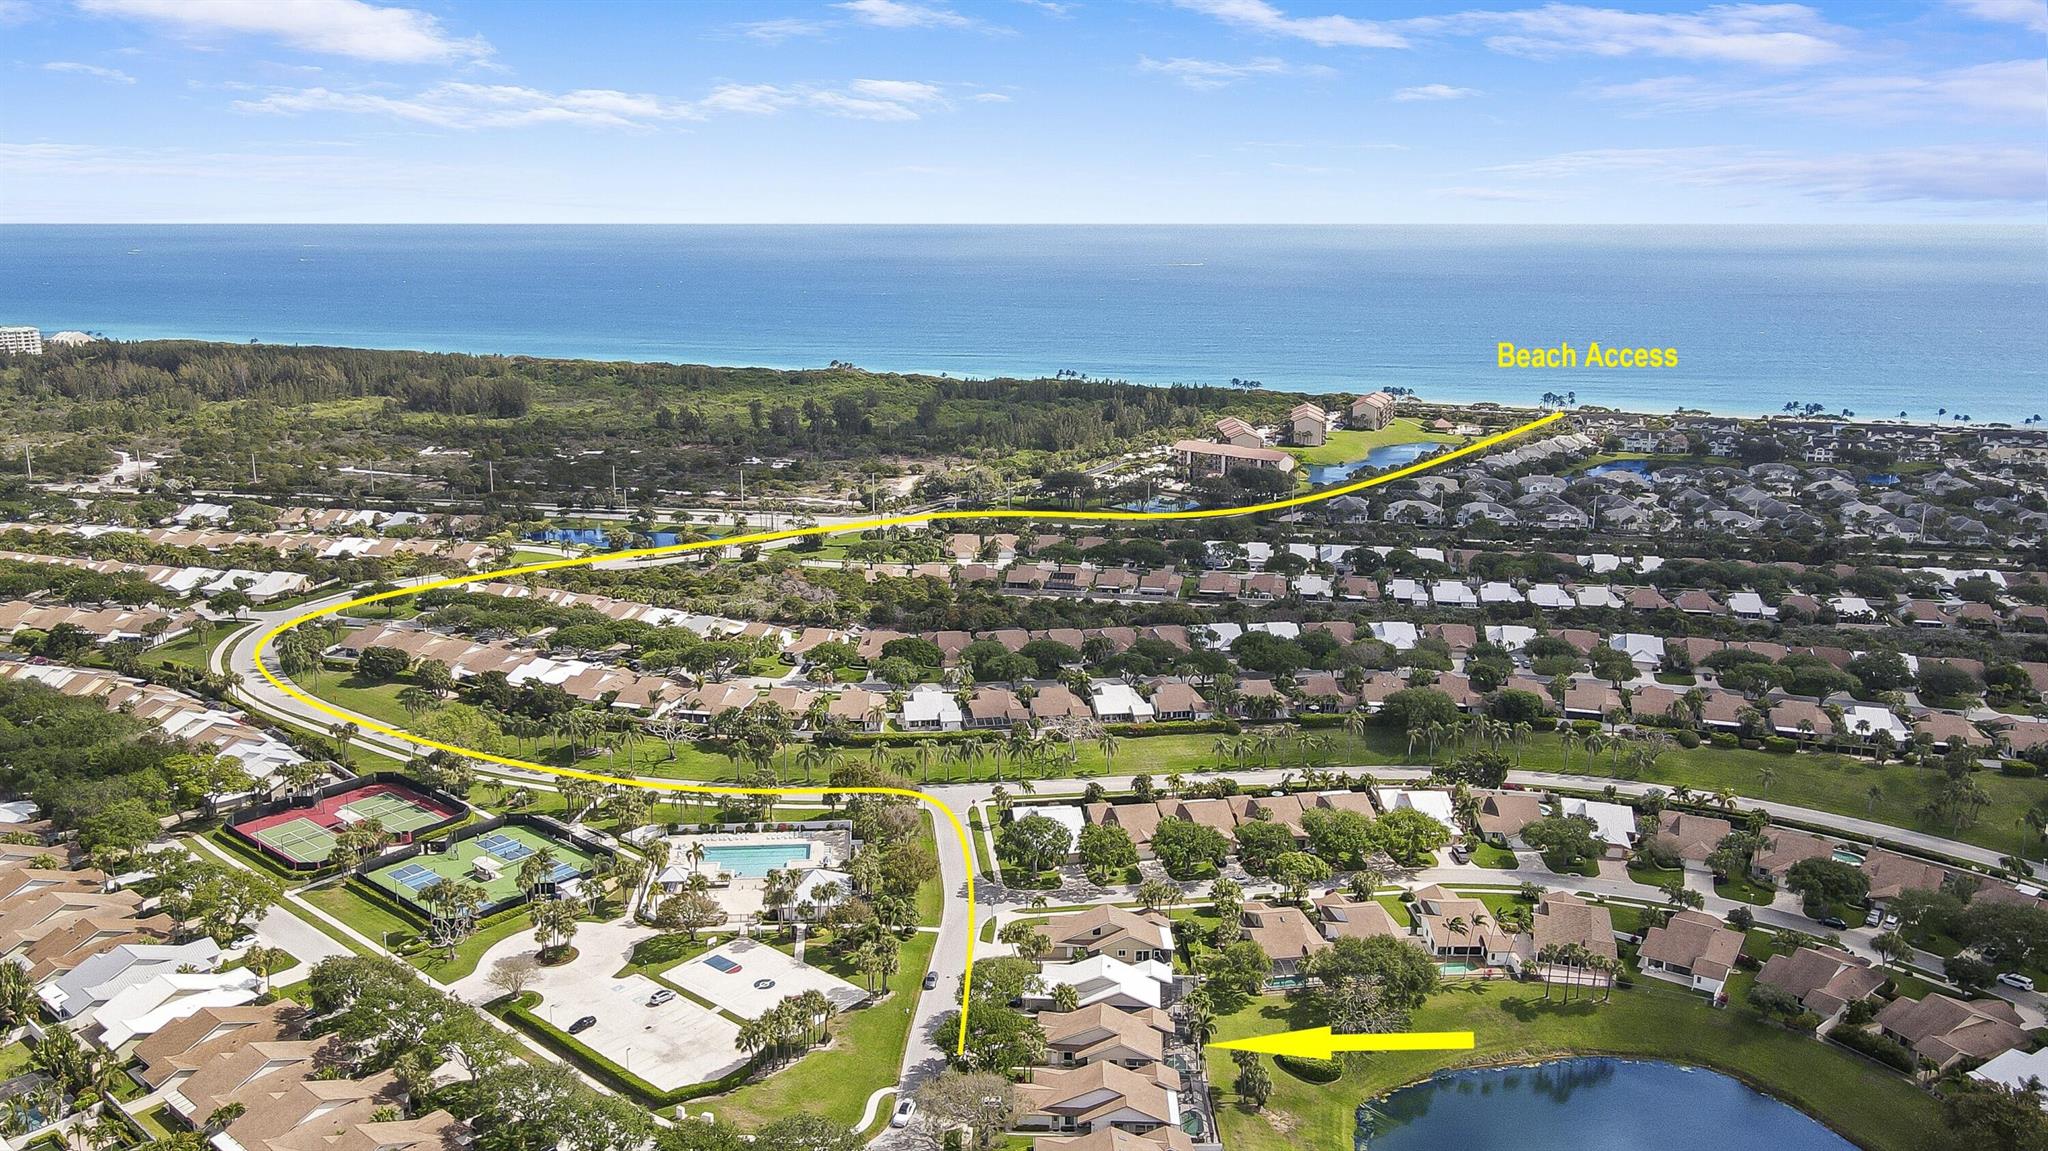 Indulge in coastal luxury at this impeccable 3 bedroom, 2-bath single-family home in Jupiter, Florida! Nestled in a pet-friendly community, this single-story retreat offers the perfect blend of style and comfort. WALK TO THE BEACH or unwind in the SALTWATER POOL with serene LAKE views from your backyard oasis. Solid CBS construction by Divosta Homes, this home features hurricane impact windows & sliding doors, vaulted ceilings, and a 2-car garage. The Ridge at the Bluffs consists of 618 single family homes within walking distance to the ocean! Community amenities include: a beautiful swimming pool & children's wading pool, three tennis courts, pickleball courts, children's playground and a basketball court. Sidewalks are covered by lush oak trees and tropical landscaping.